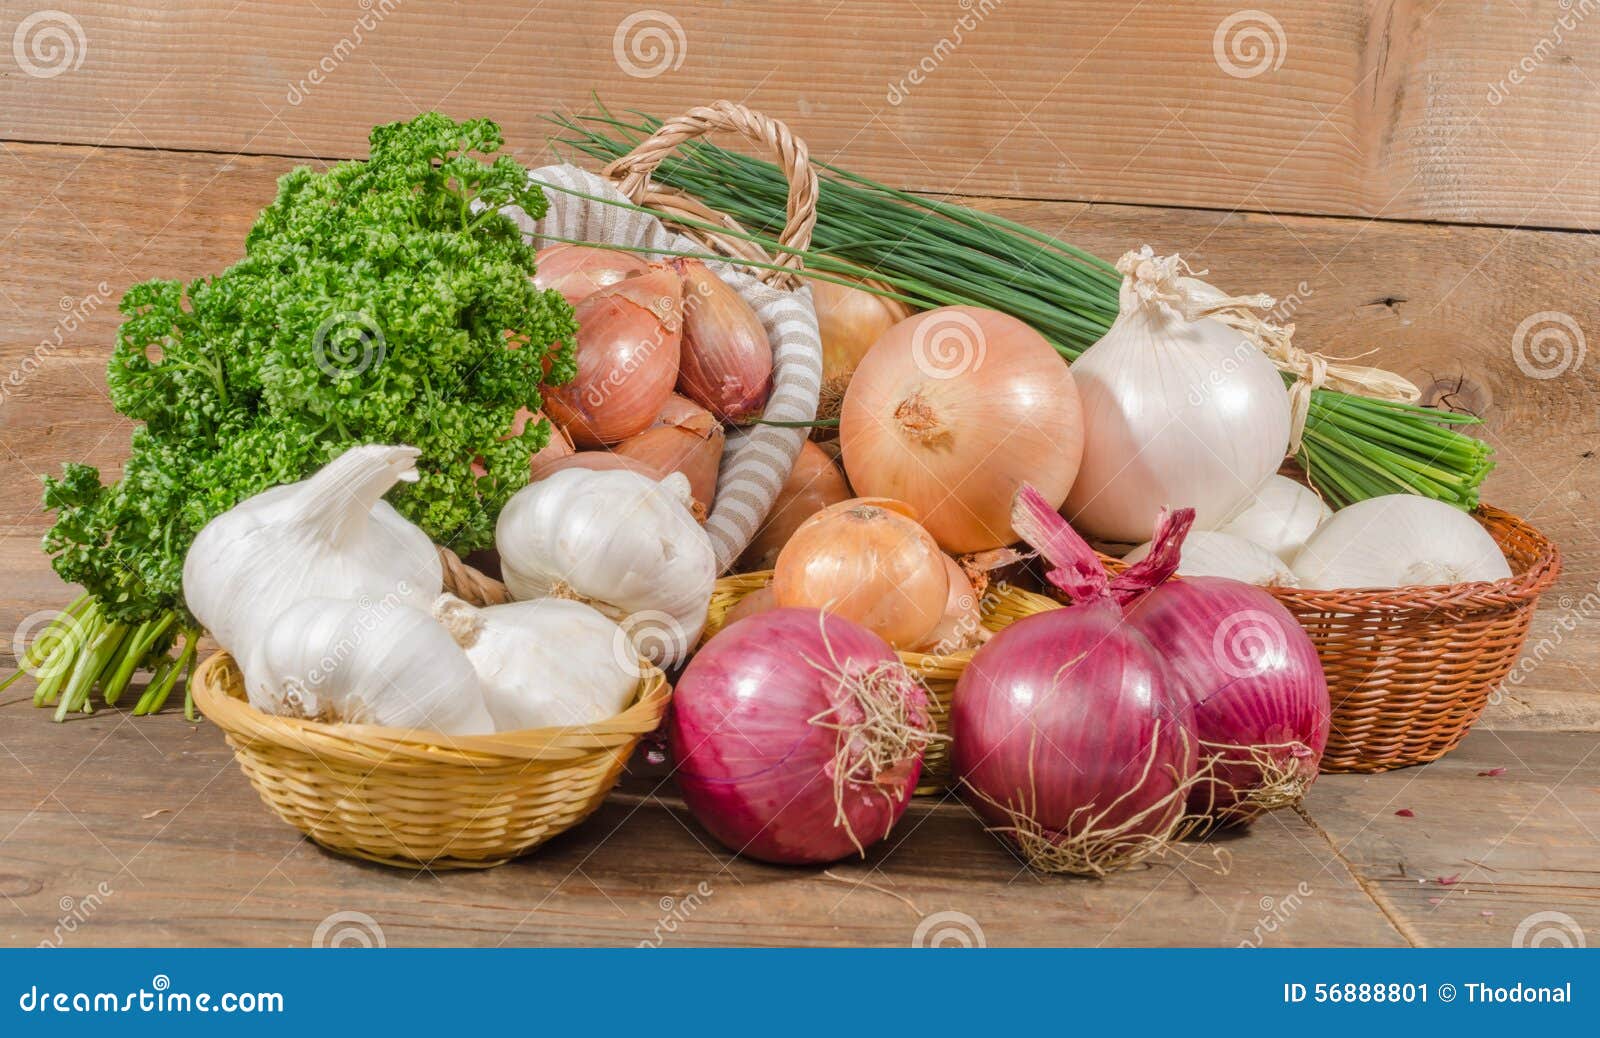 different types of onions, garlic and shallots